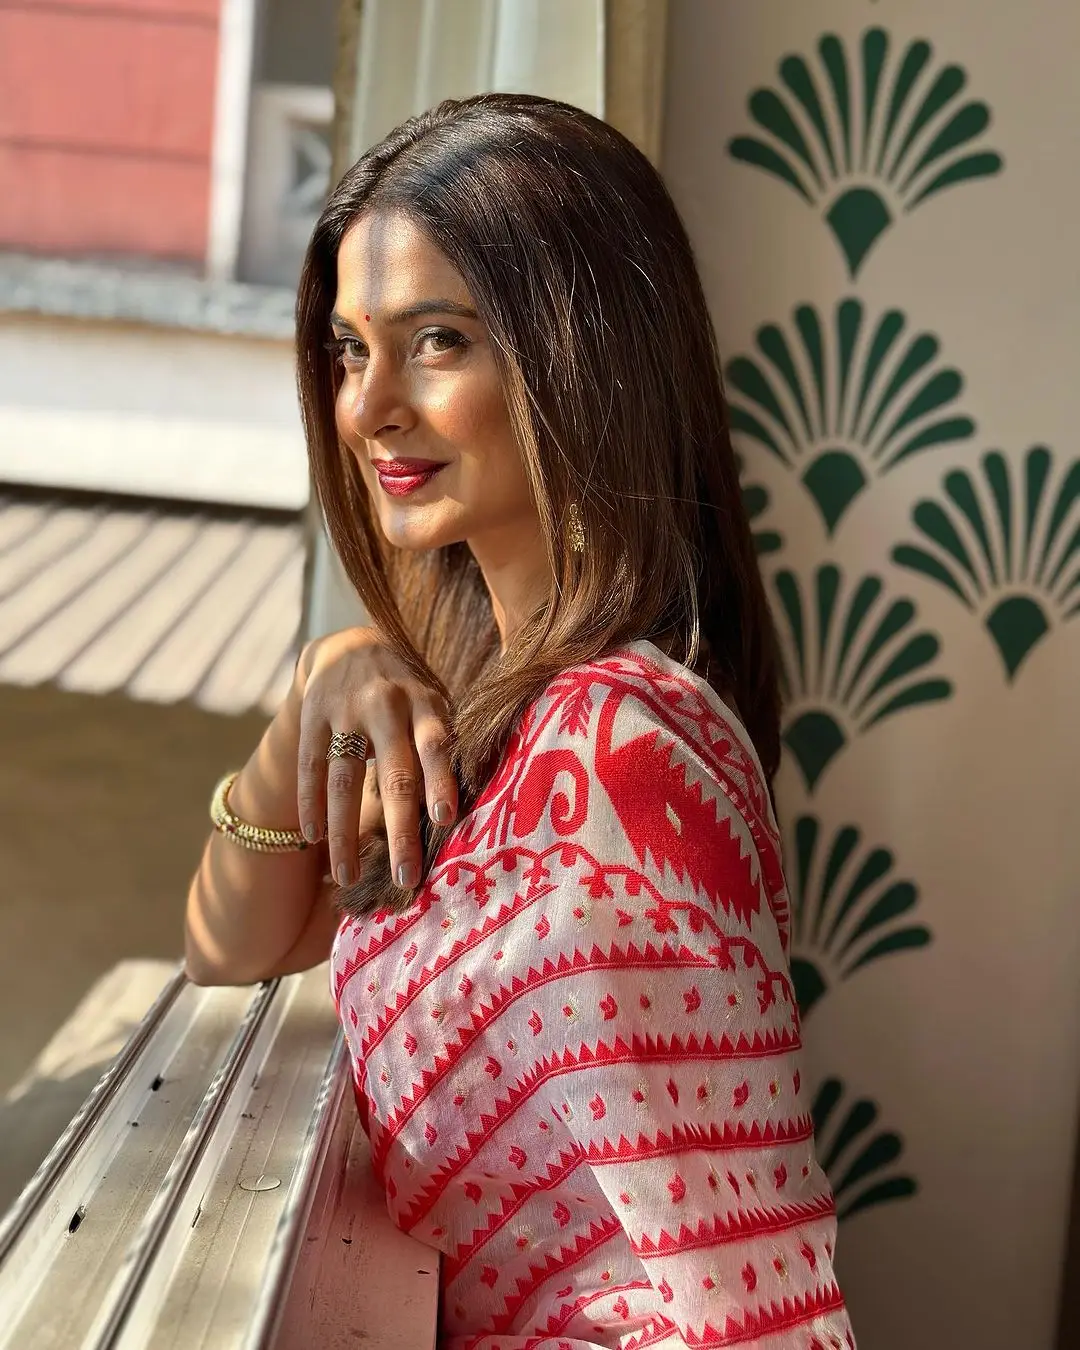 INDIAN GIRL JENNIFER WINGET IN TRADITIONAL RED SAREE SLEEVELESS BLOUSE 2